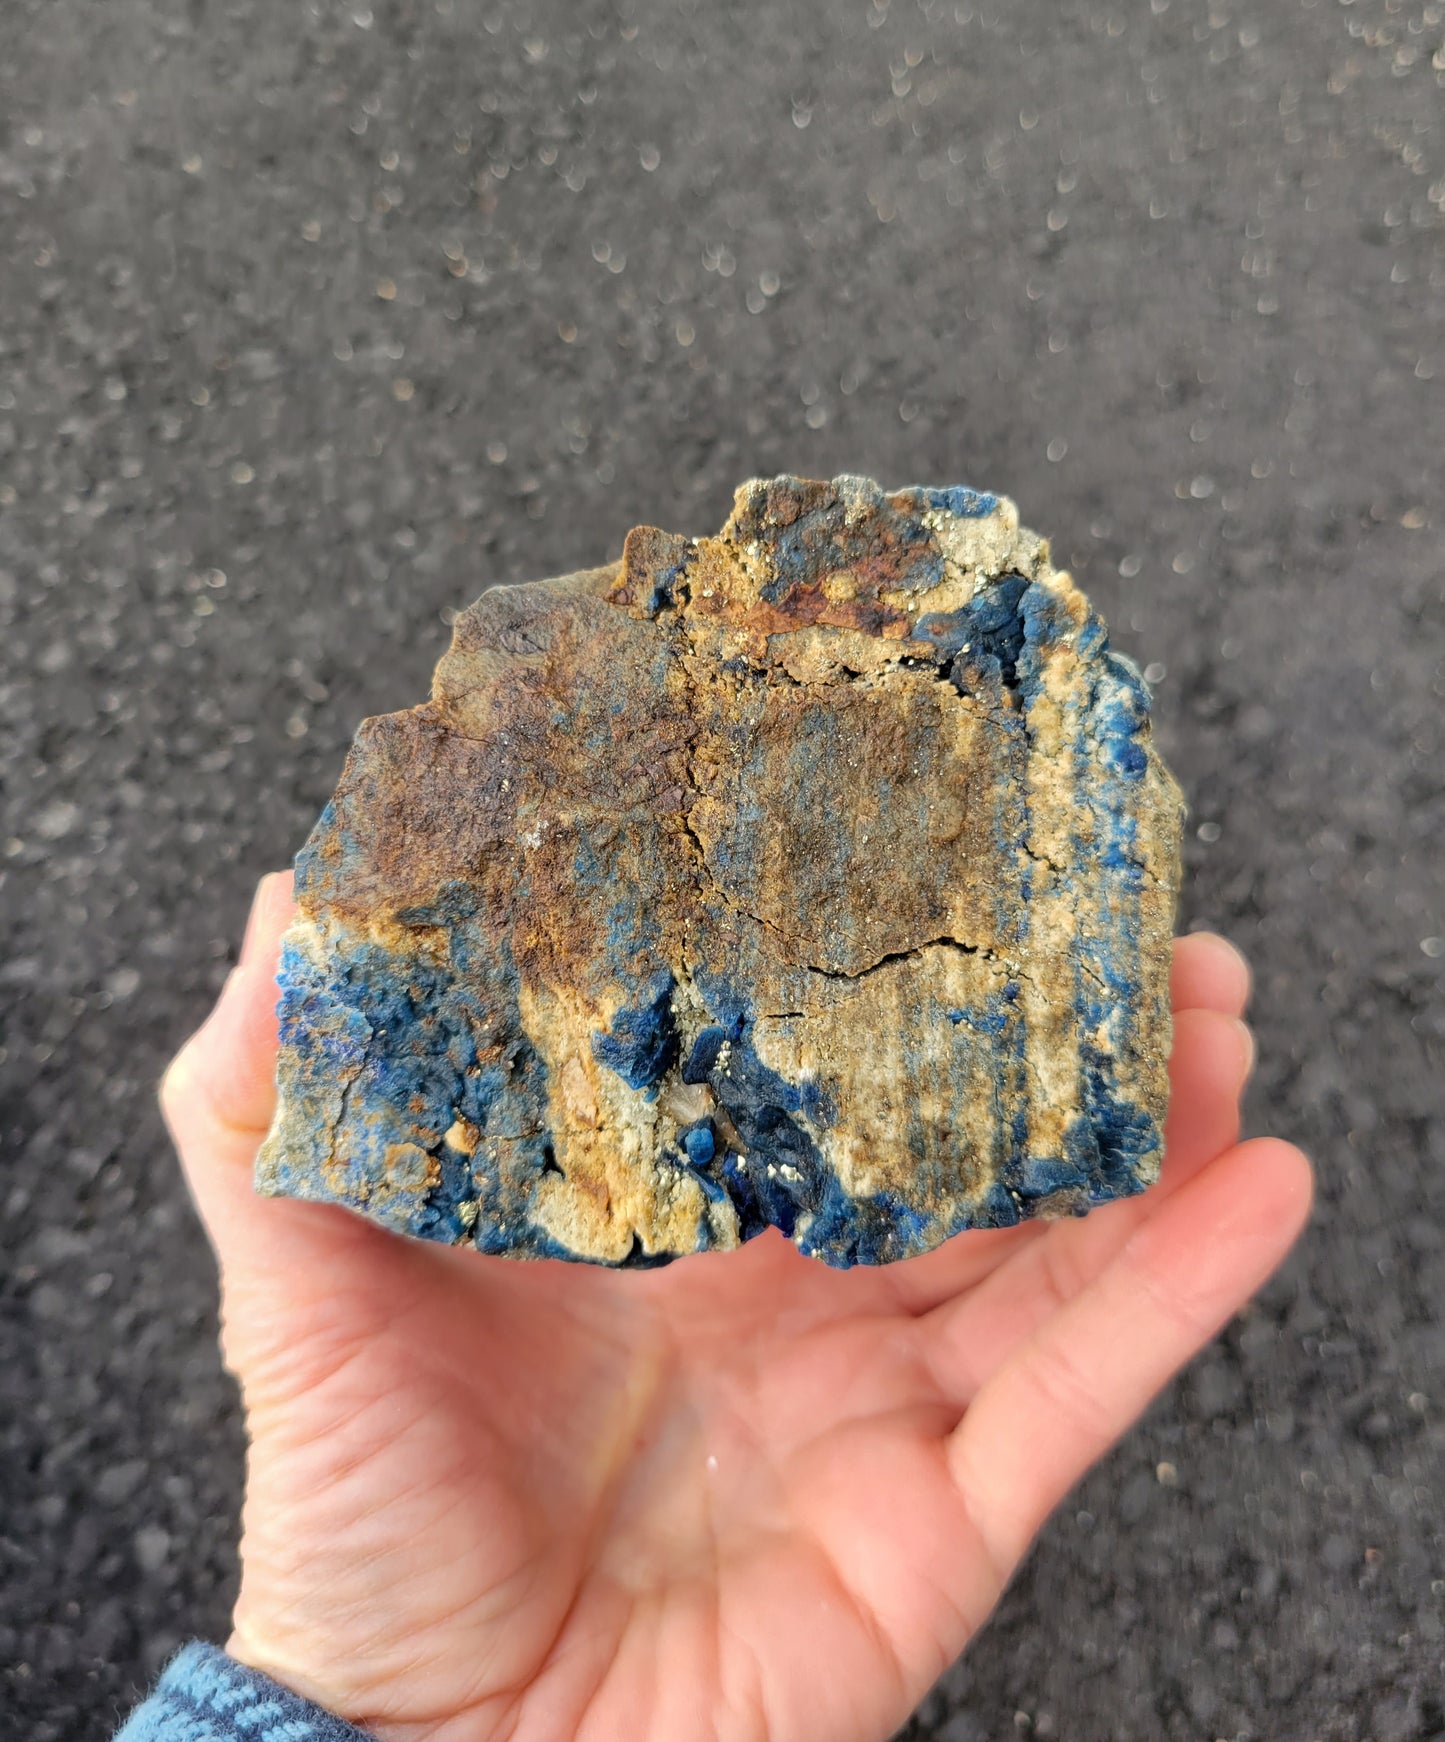 Afghanite, Lazulite, and Pyrite from Pakistan